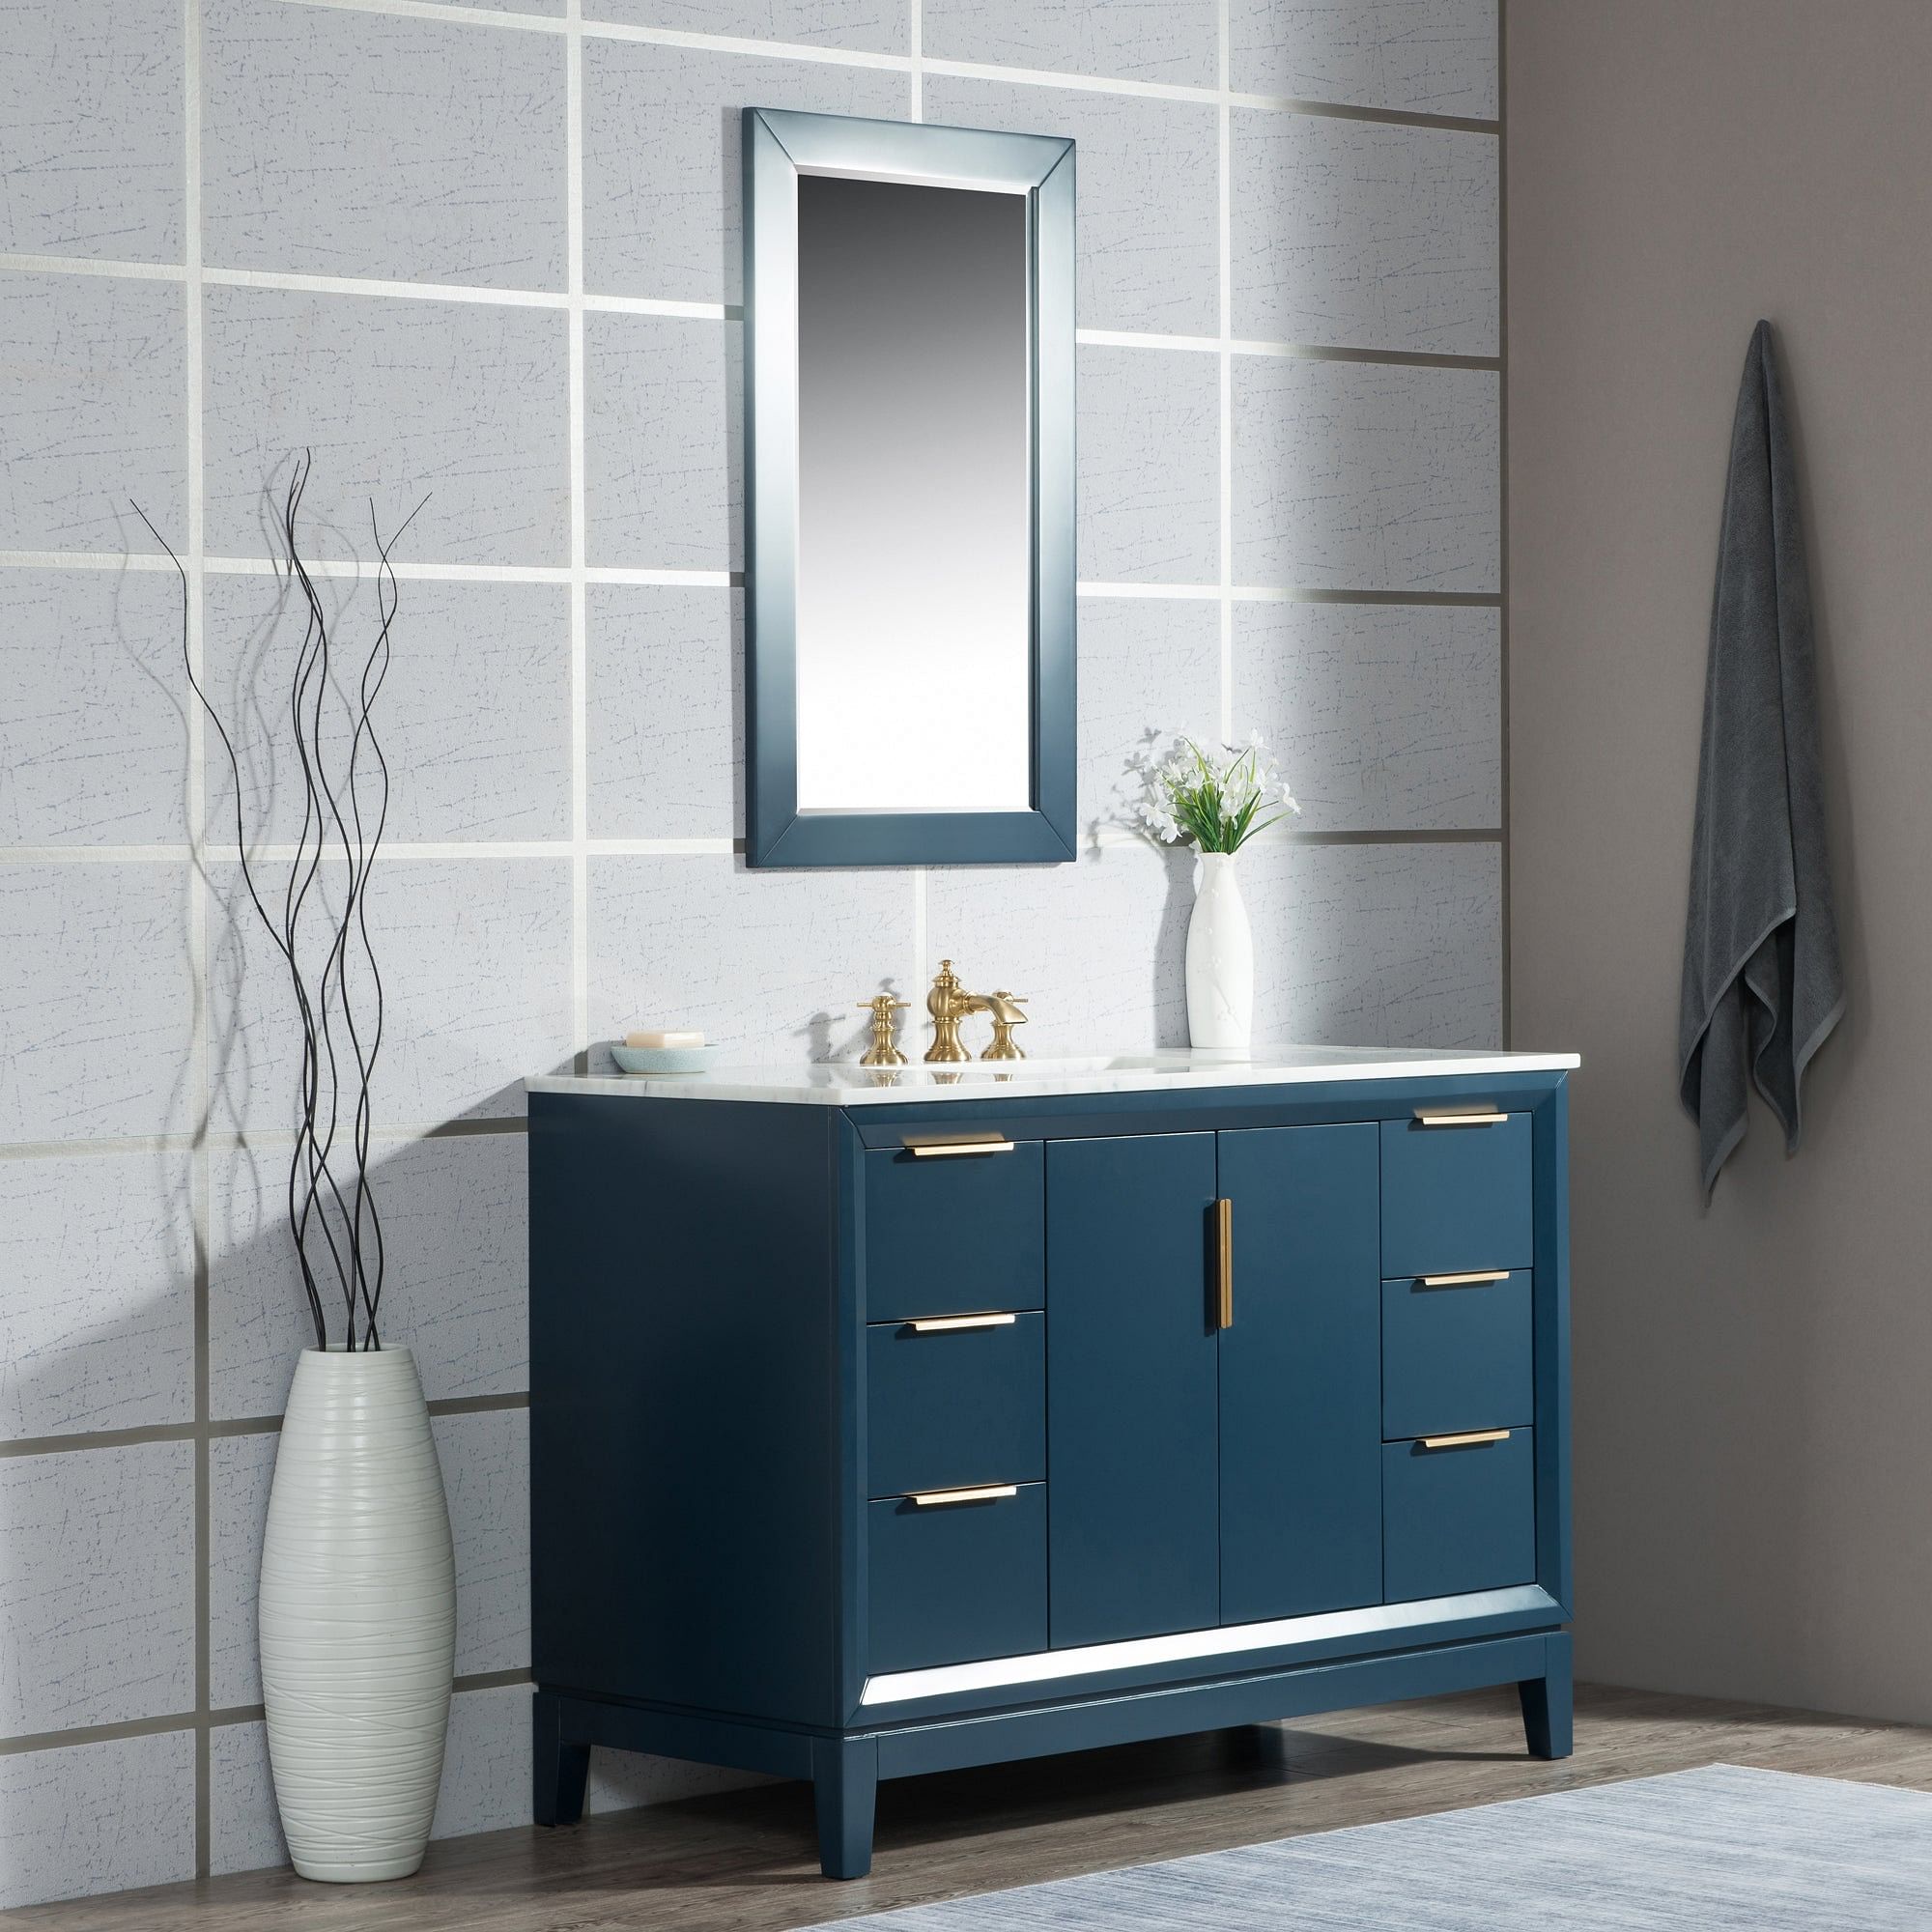 Elizabeth 48-Inch Single Sink Carrara White Marble Vanity In Monarch Blue  With Faucet(s)